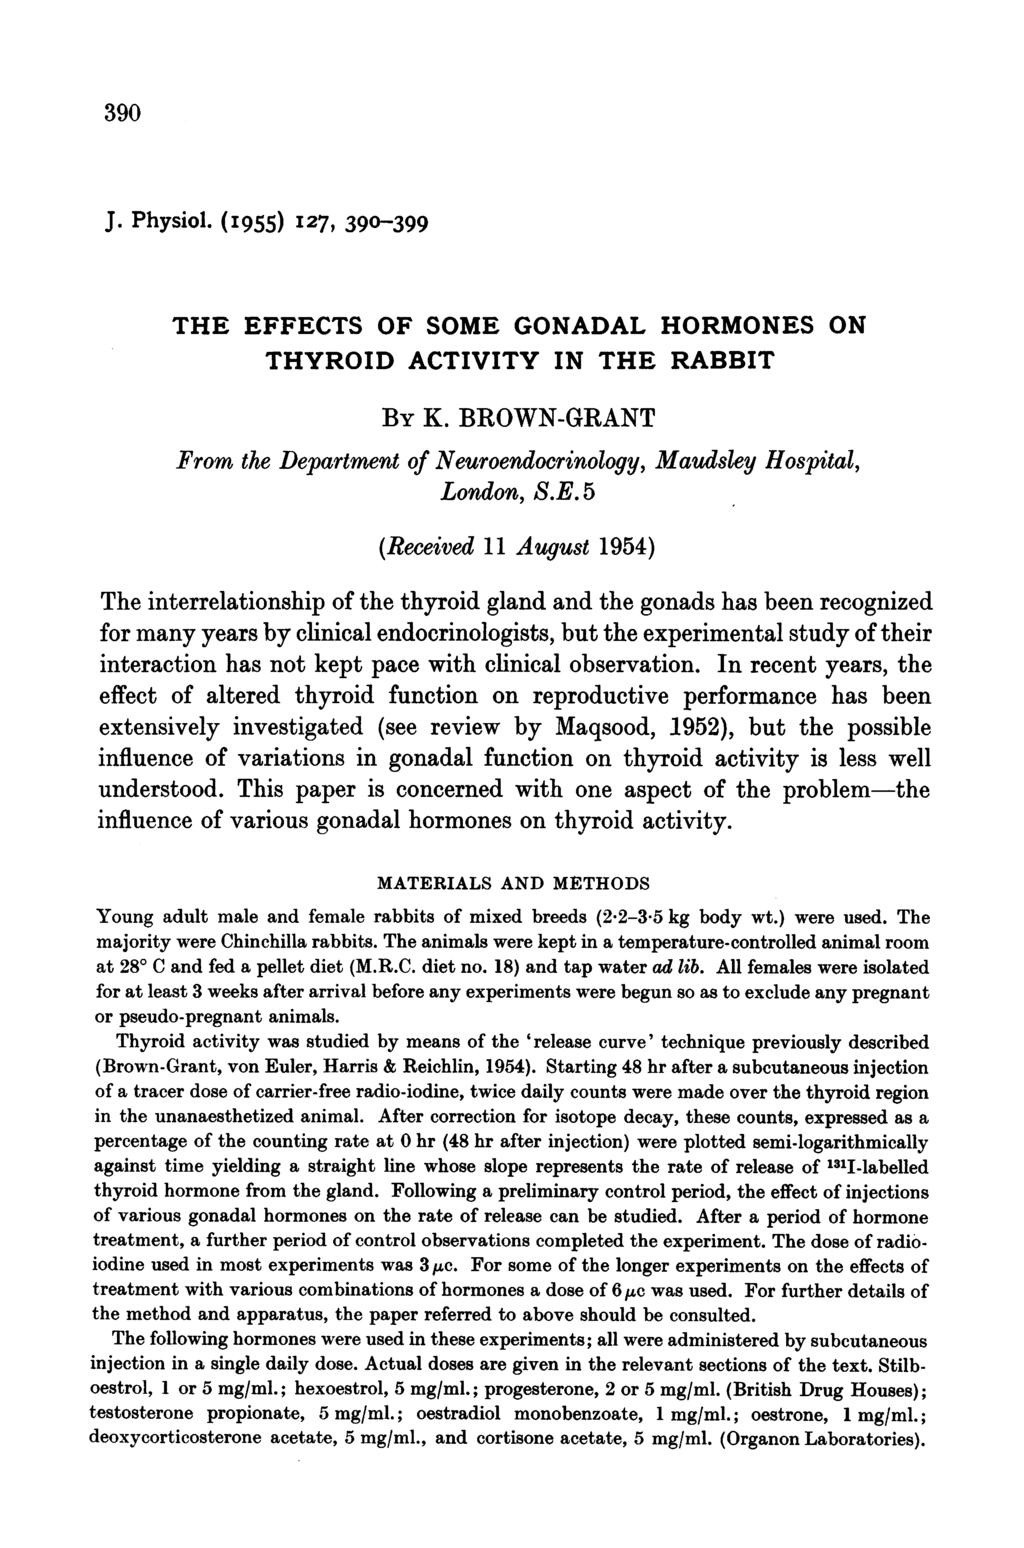 390 J. Physiol. (I 955) I 27, 390-399 THE EFFECTS OF SOME GONADAL HORMONES ON THYROID ACTIVITY IN THE RABBIT BY K. BROWN-GRANT From the Department of Neuroendocrinology, Maudsley Hospital, London, S.